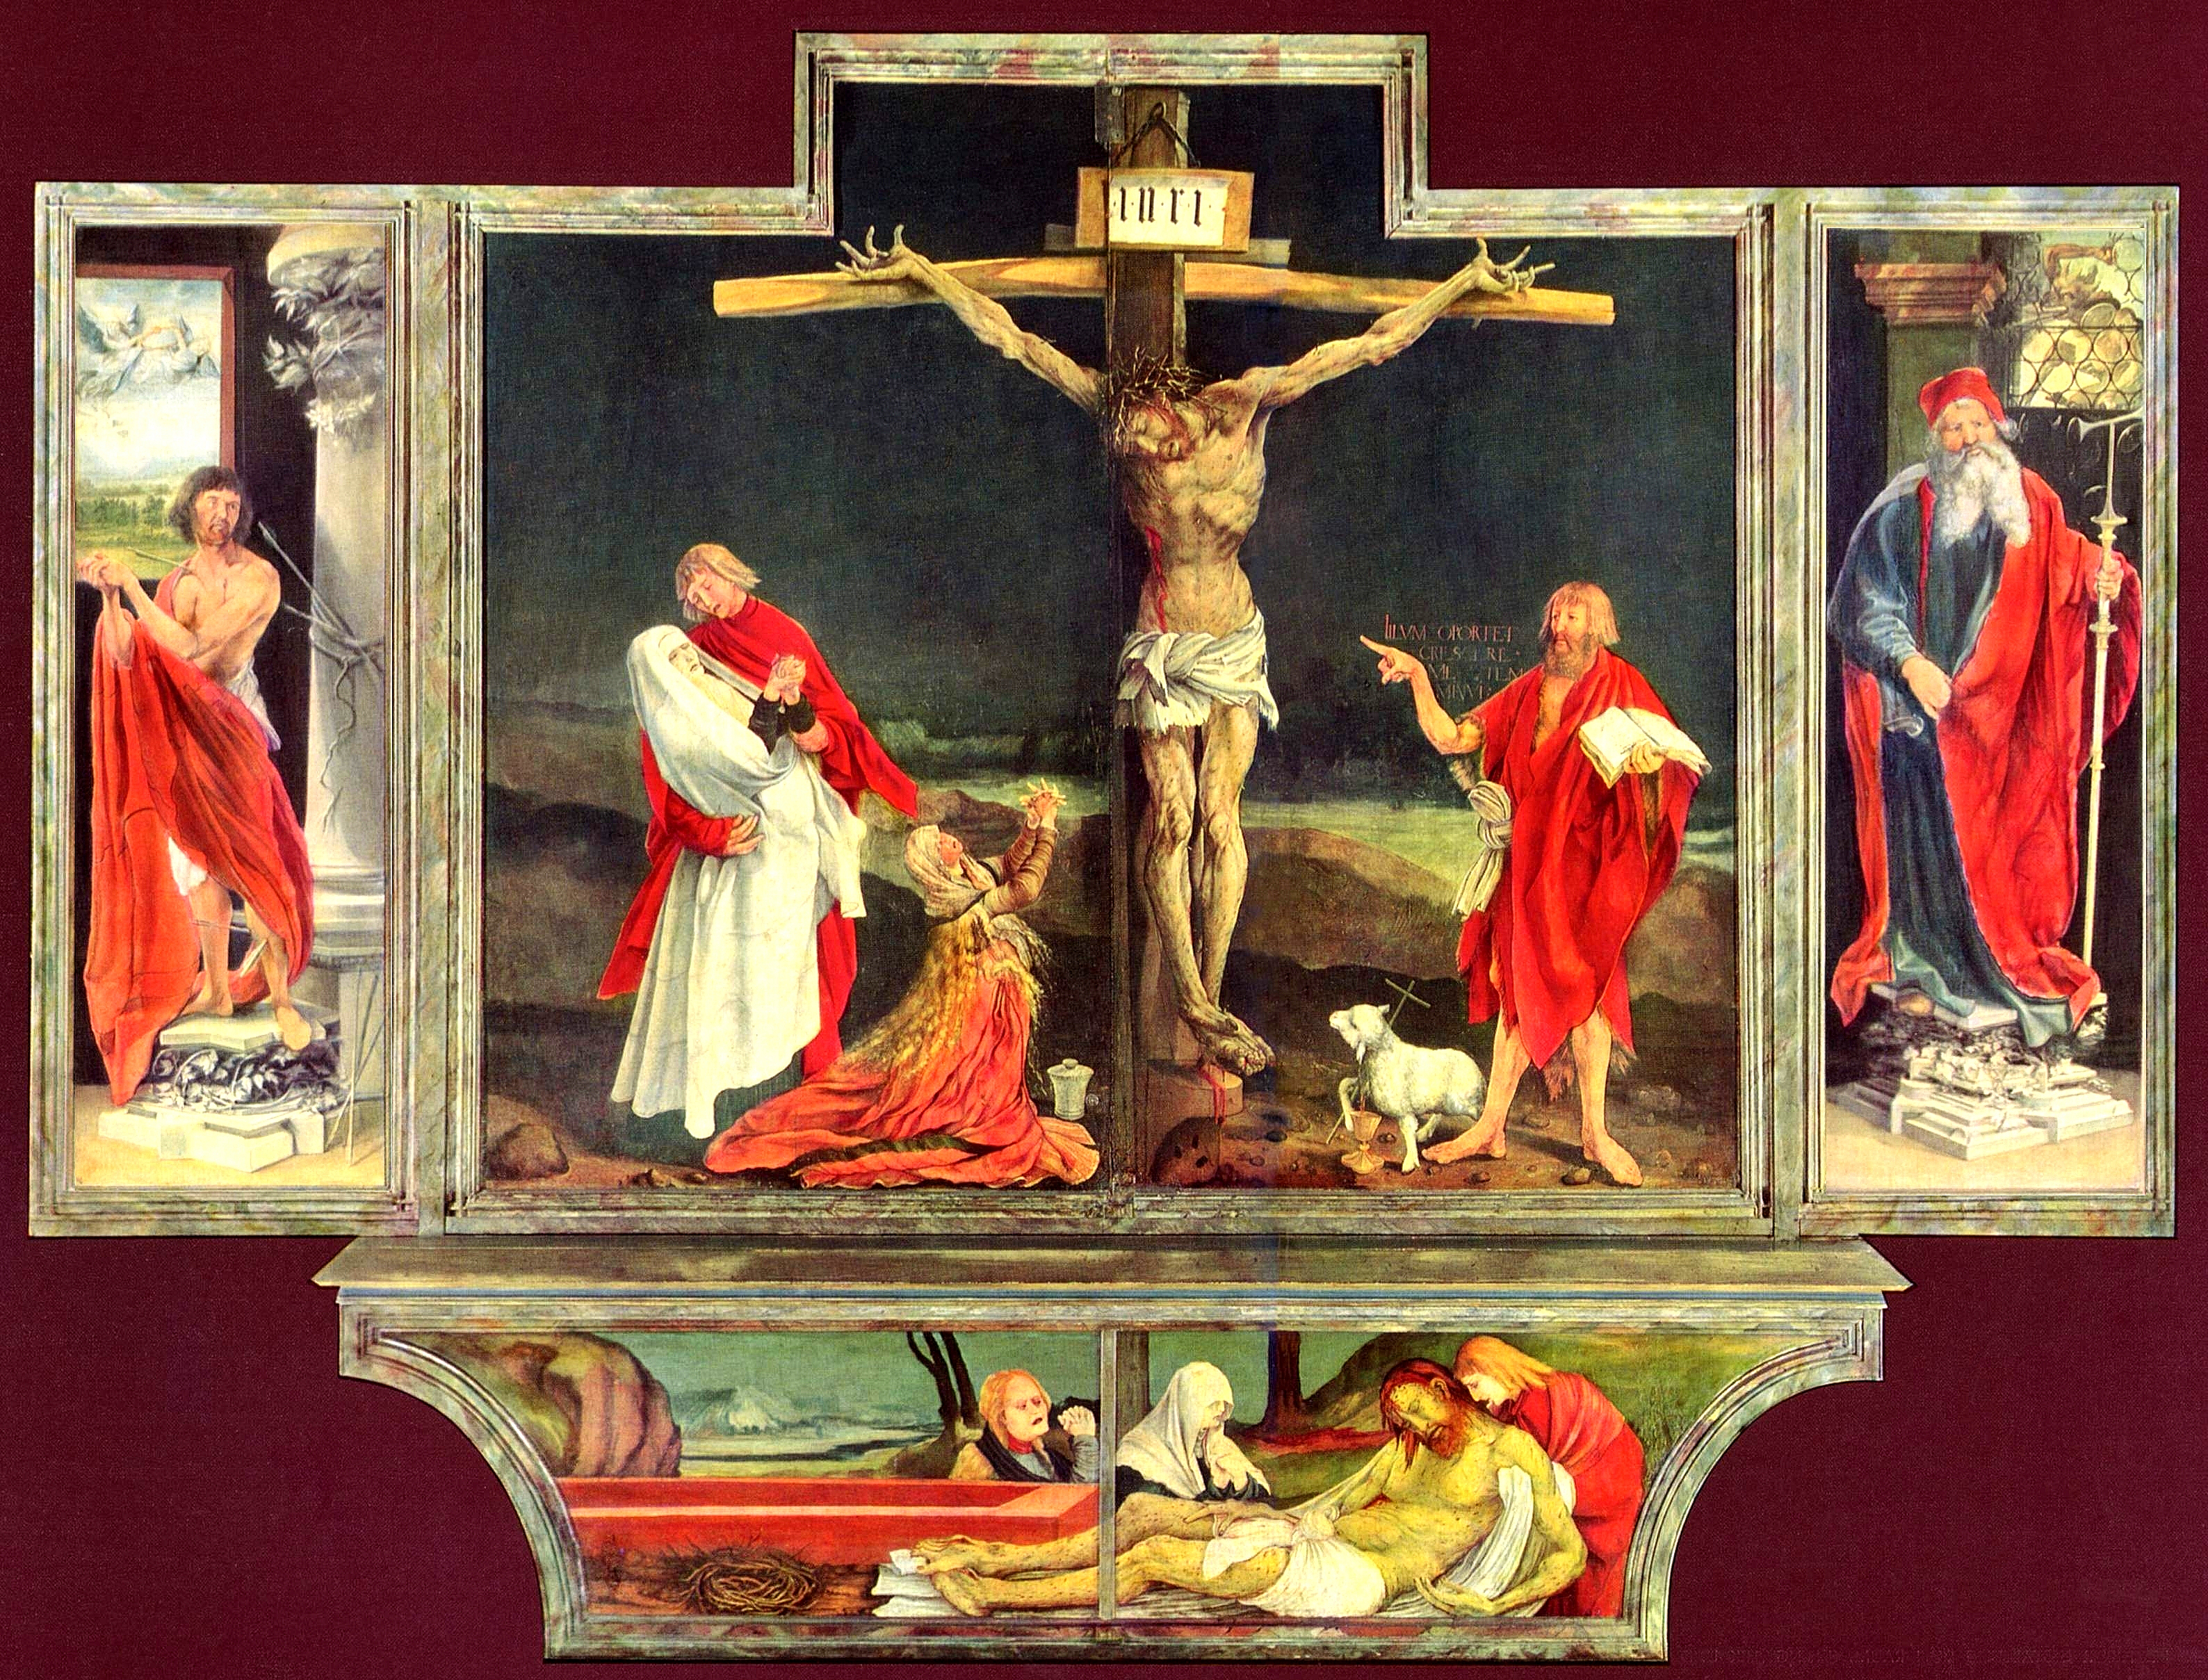 “The Crucifixion with Saints and a Donor” in comparison with “The Isenheim Altarpiece – First View” by Matthias Grünewald and Niclaus of Haguenau 